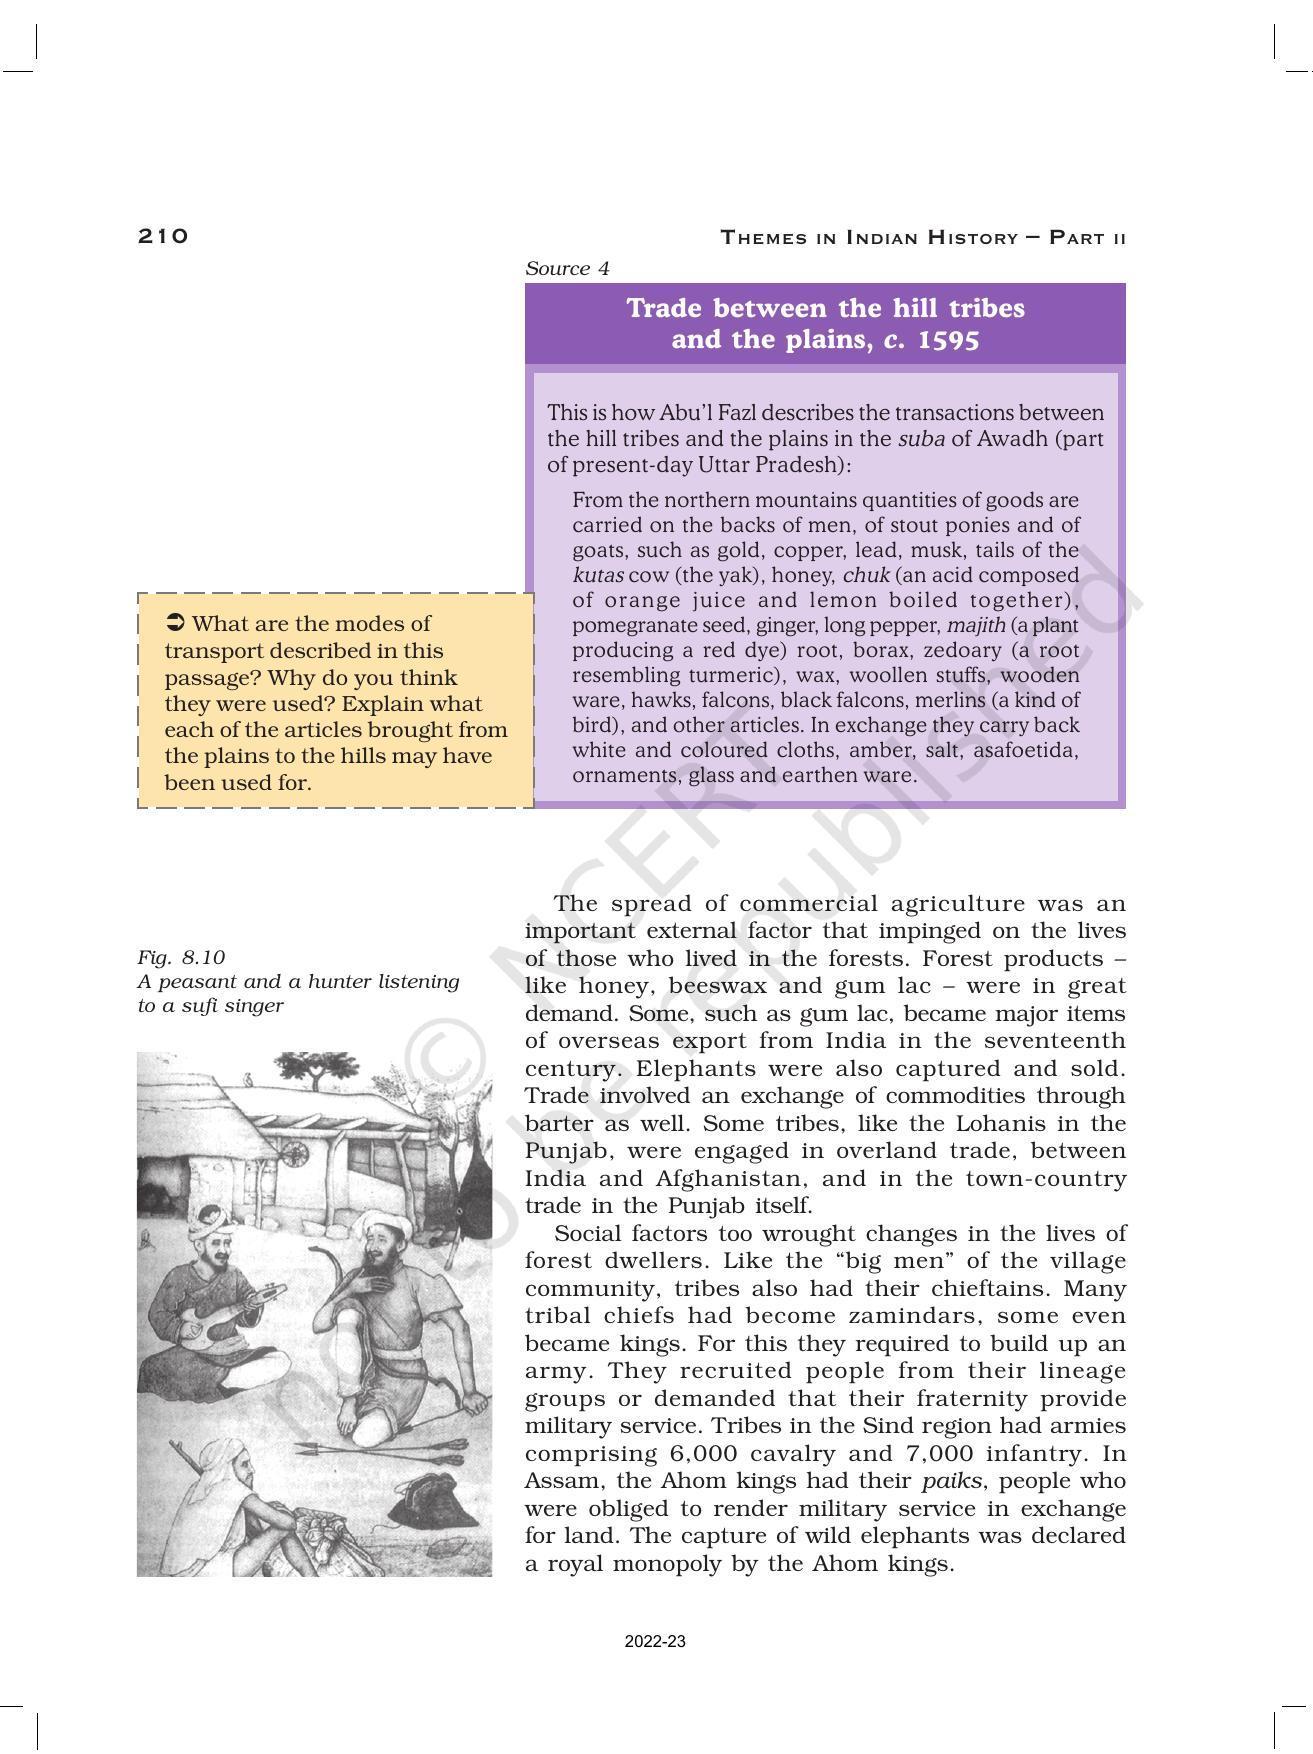 NCERT Book for Class 12 History (Part-II) Chapter 8 Peasants, Zamindars, and the State - Page 15